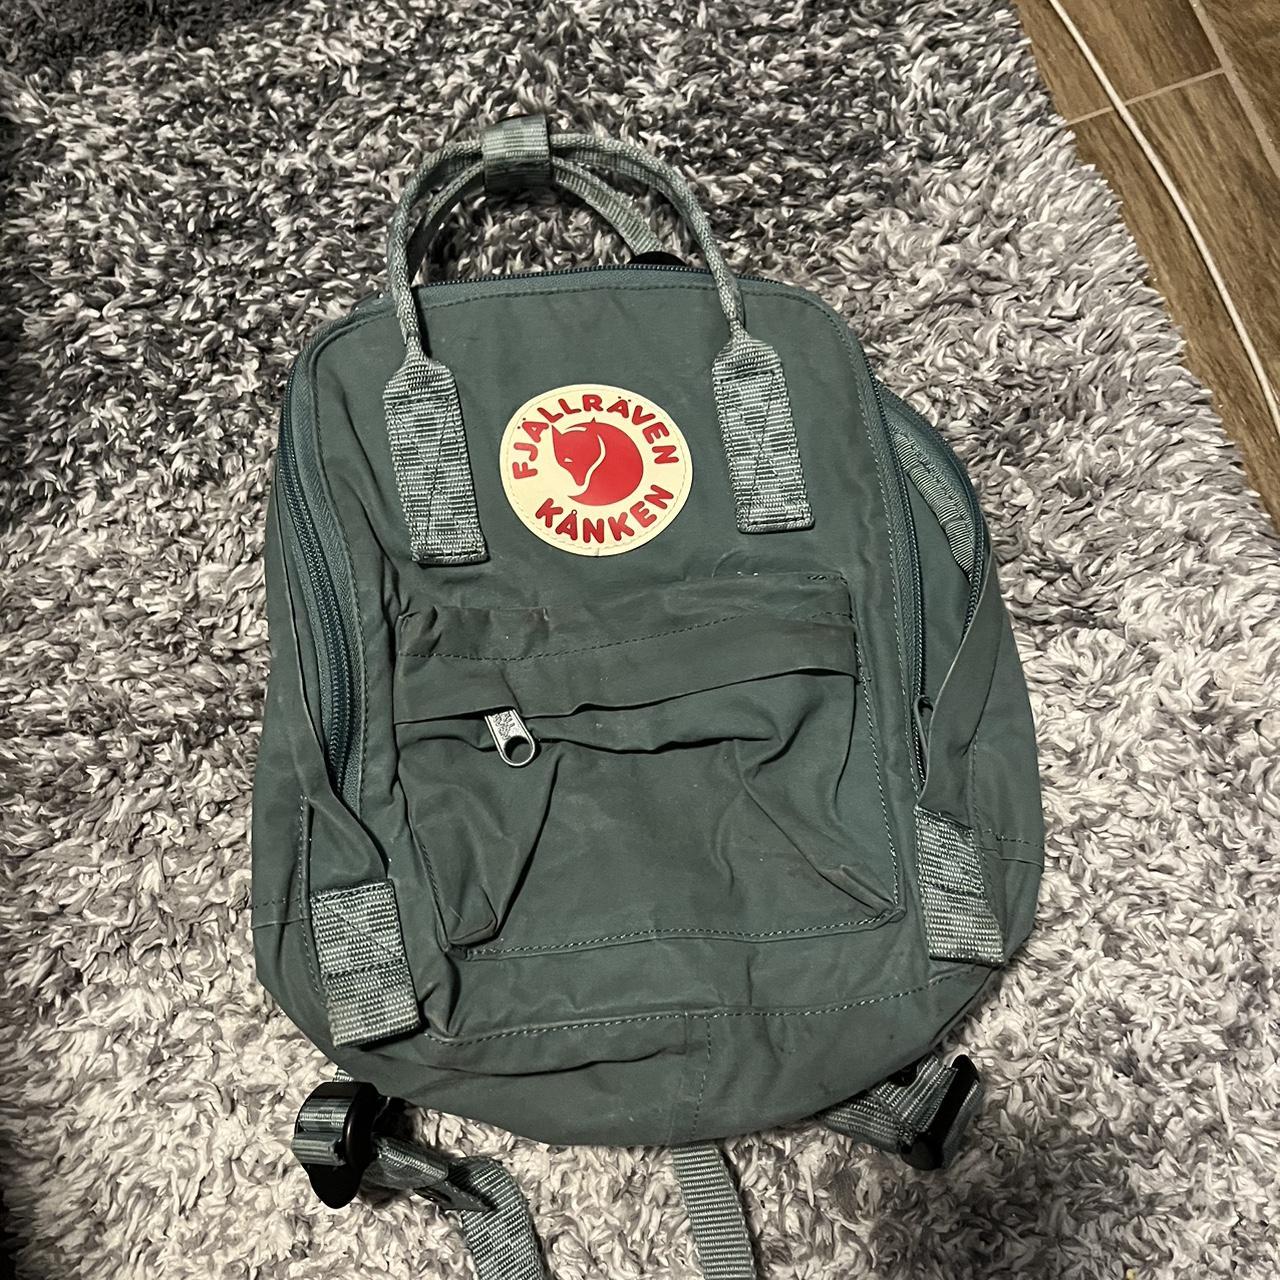 MARGOT New York Backpack Only backpack you'll need - Depop